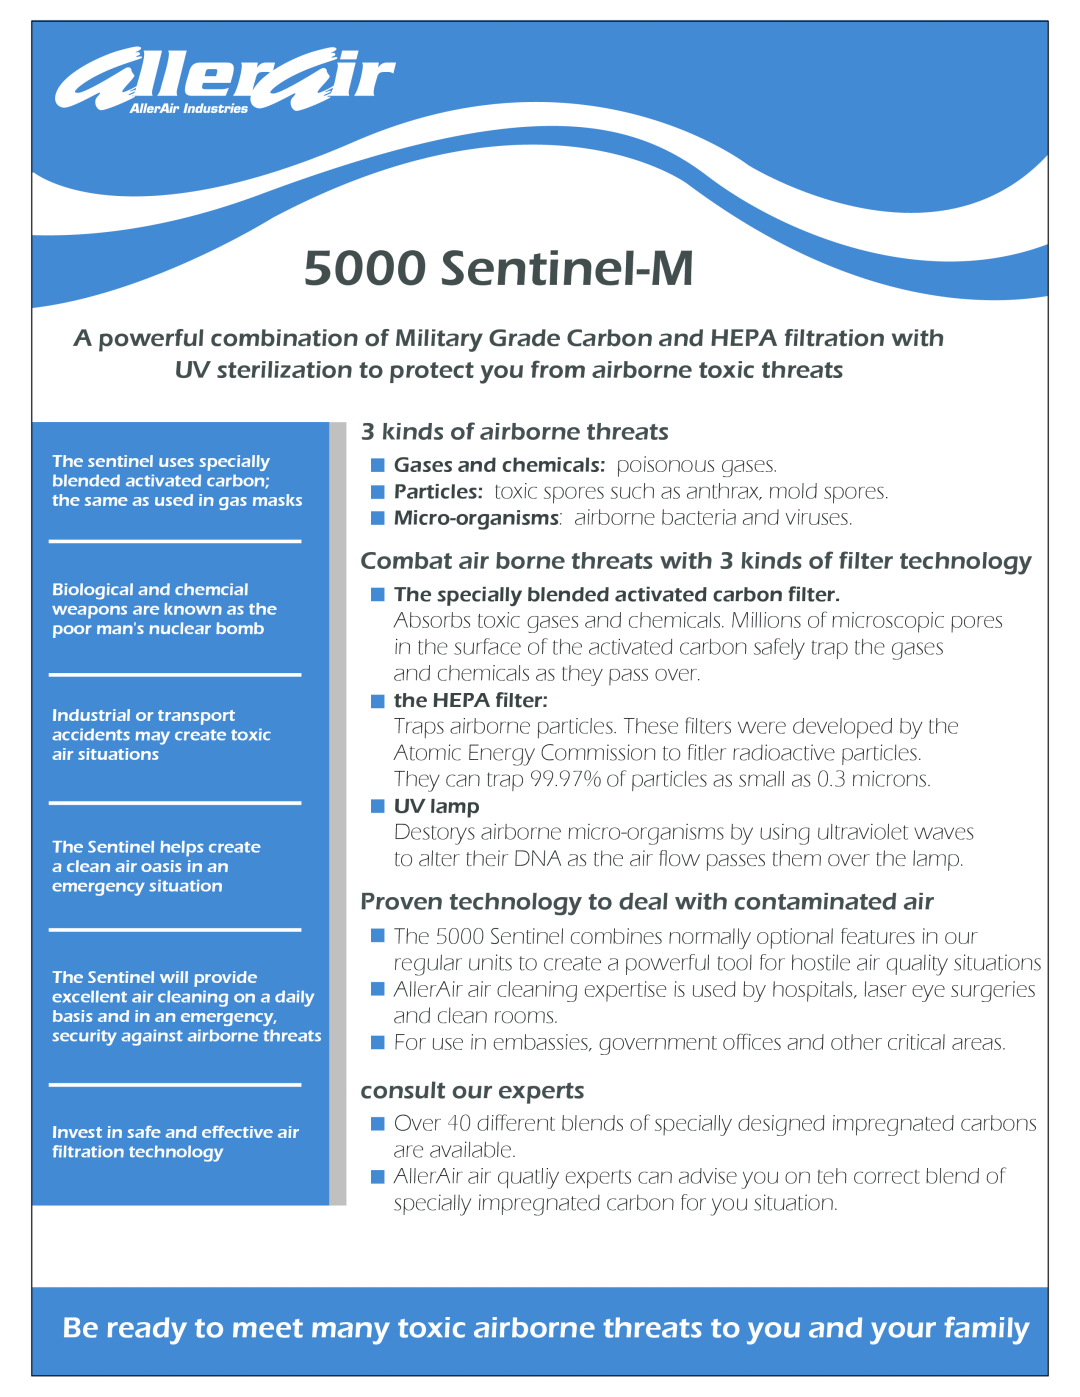 AllerAir 5000 Sentinel-M kinds of airborne threats, Proven technology to deal with contaminated air, consult our experts 